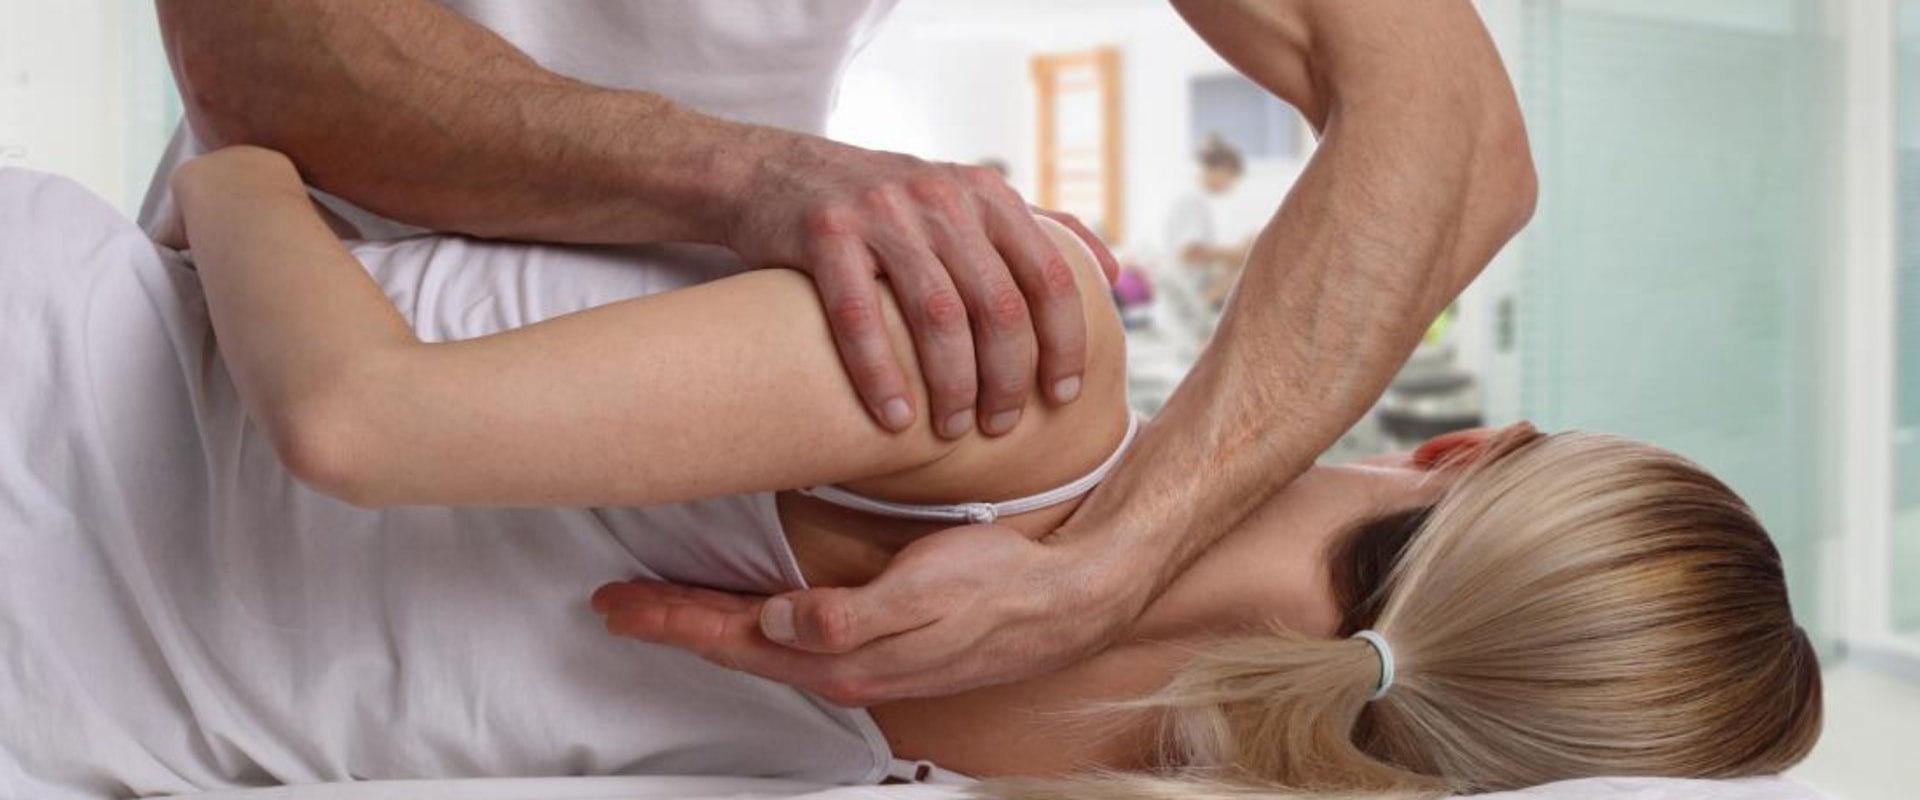 Do chiropractors help or make things worse?